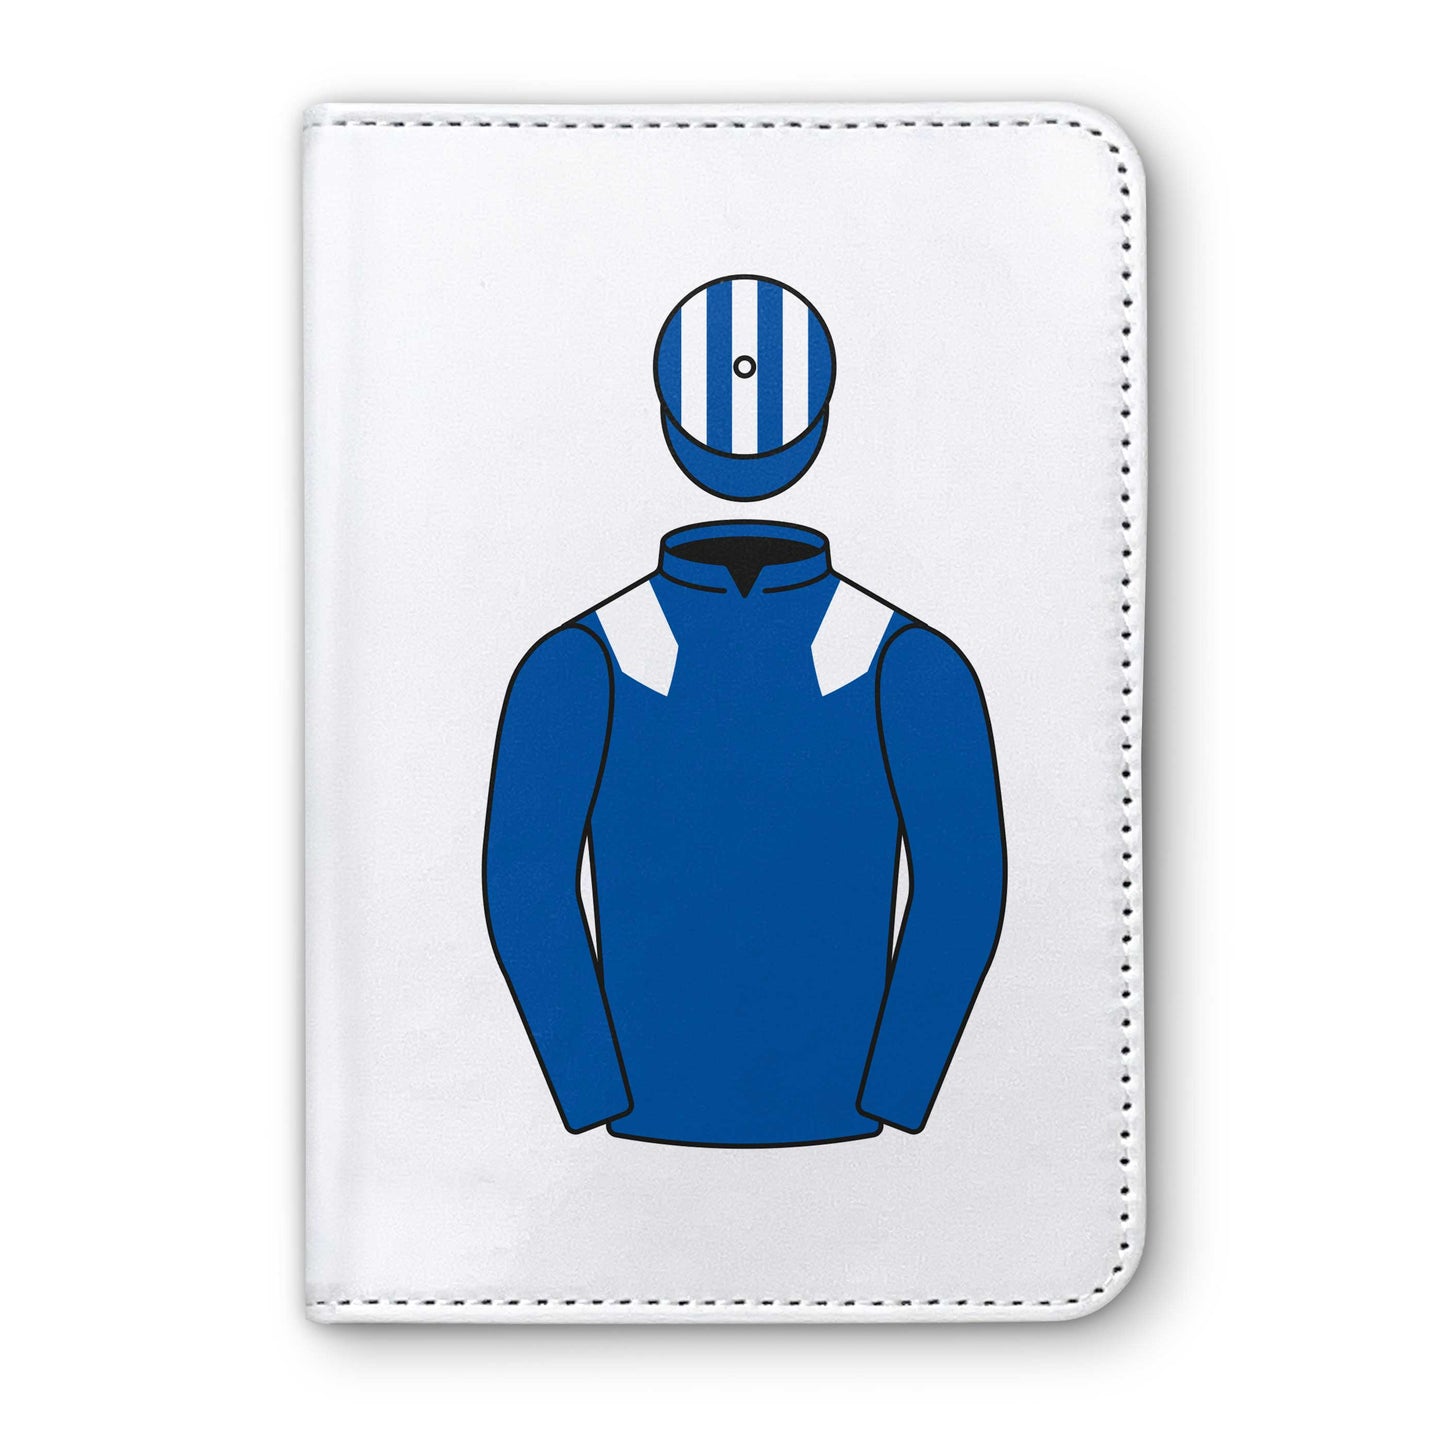 Shadwell Stud Horse Racing Passport Holder - Hacked Up Horse Racing Gifts